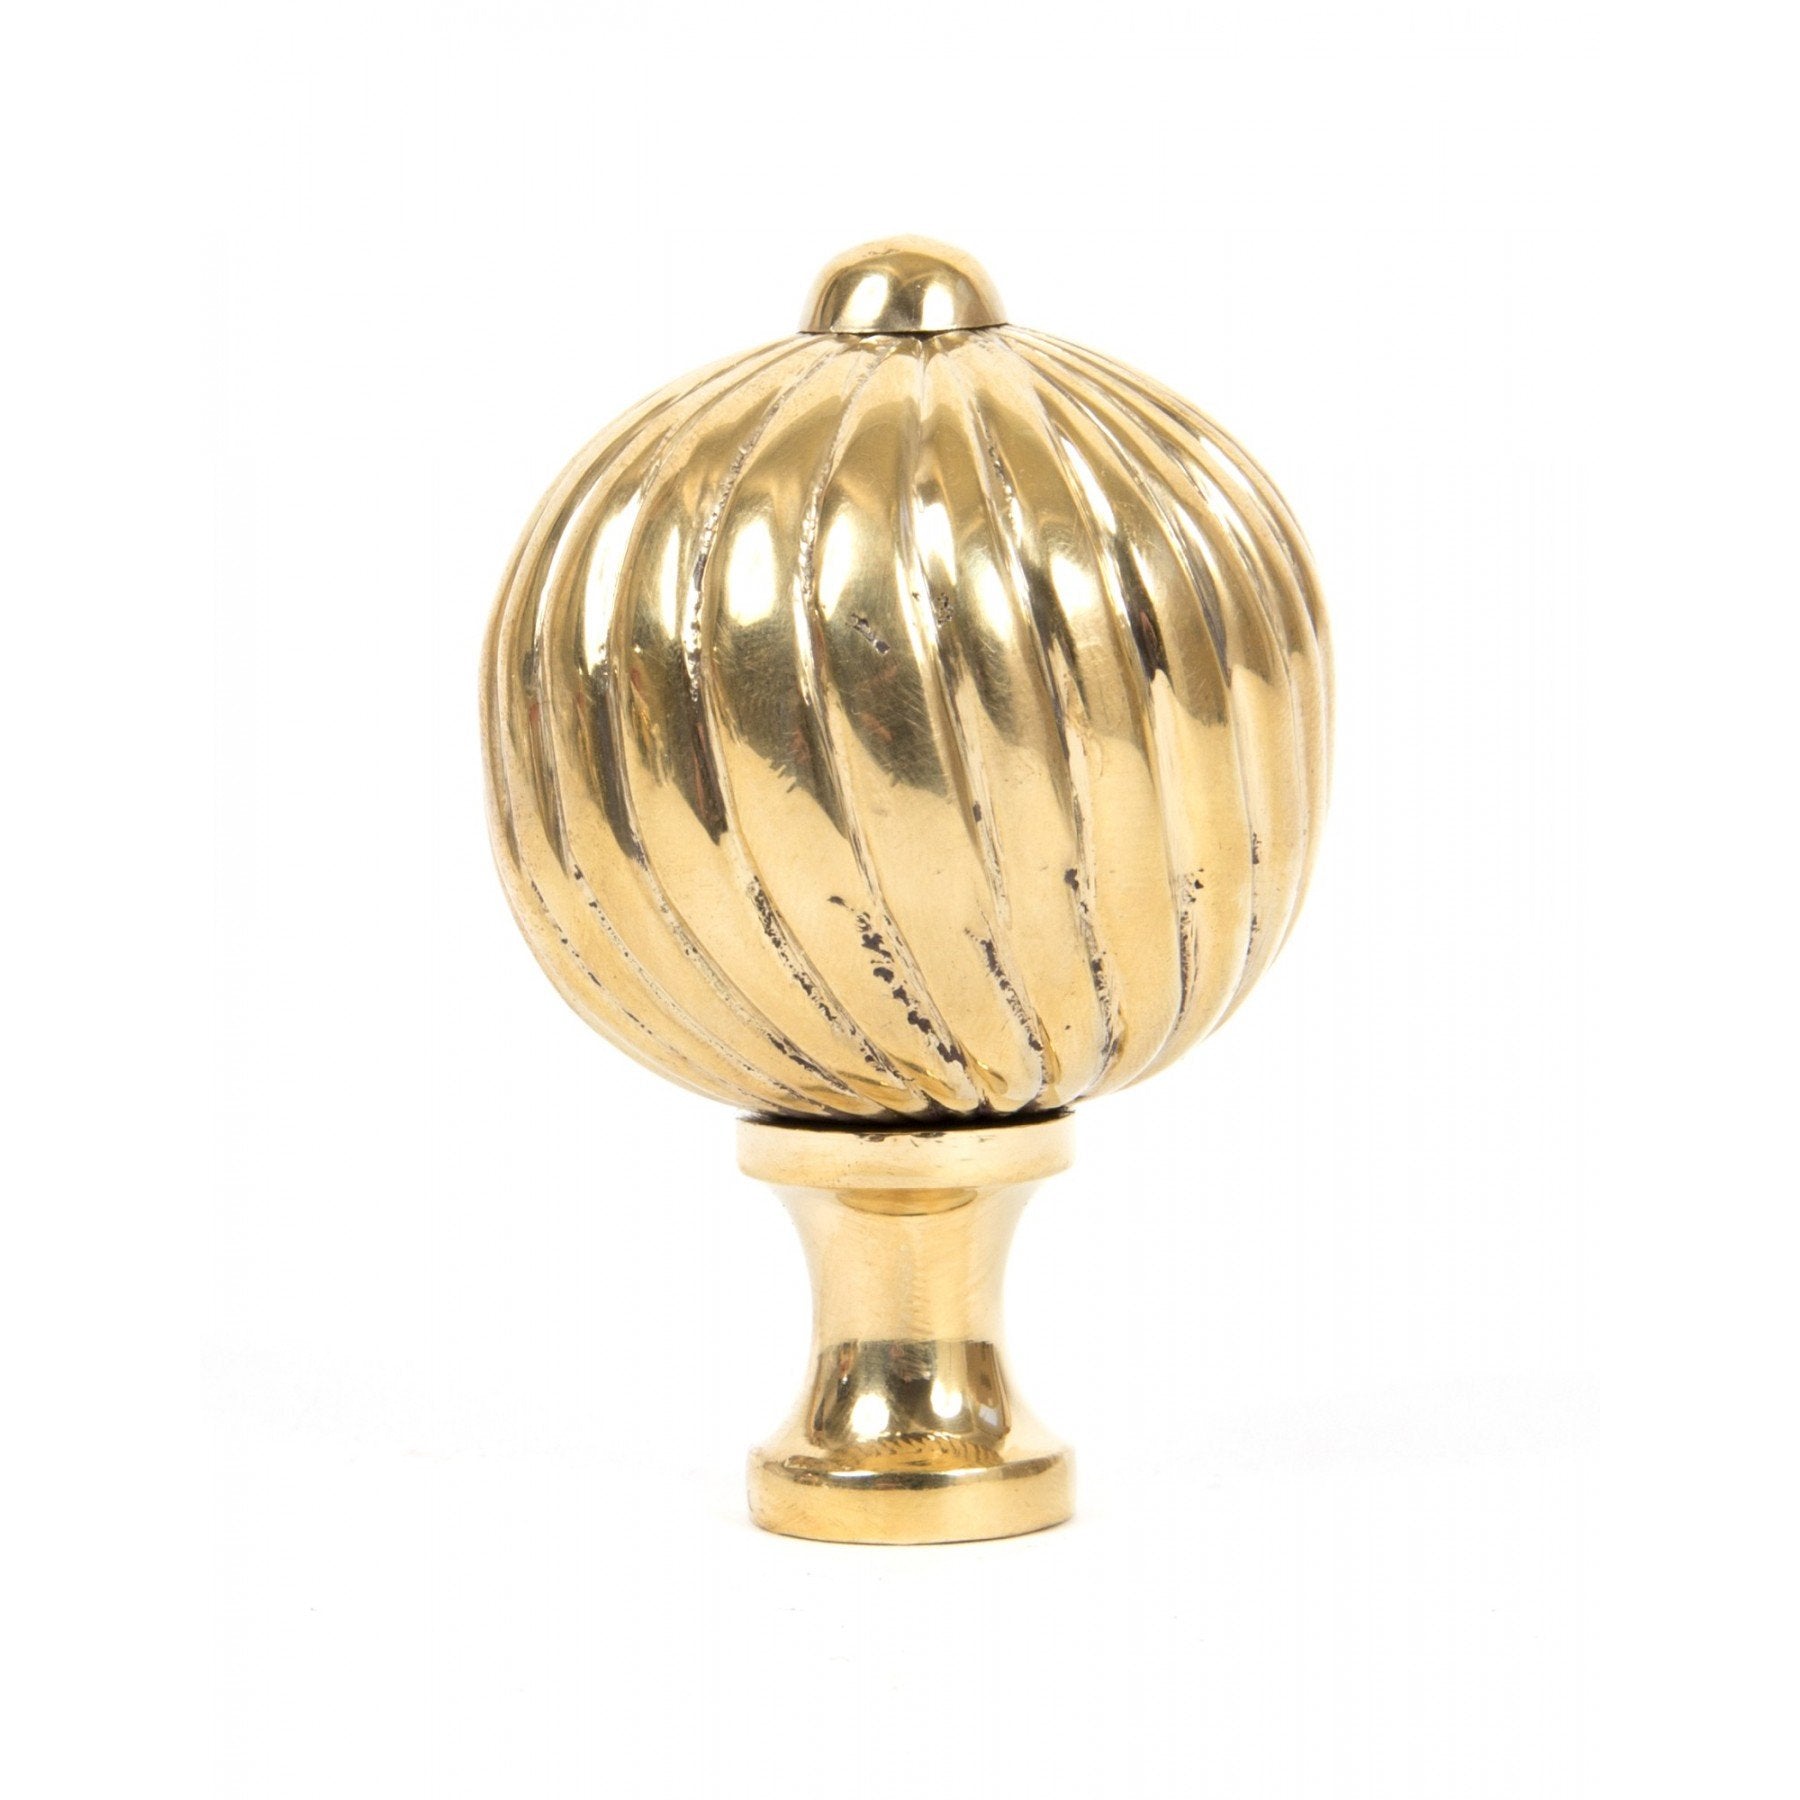 From the Anvil Polished Brass Spiral Cabinet Knob - Large